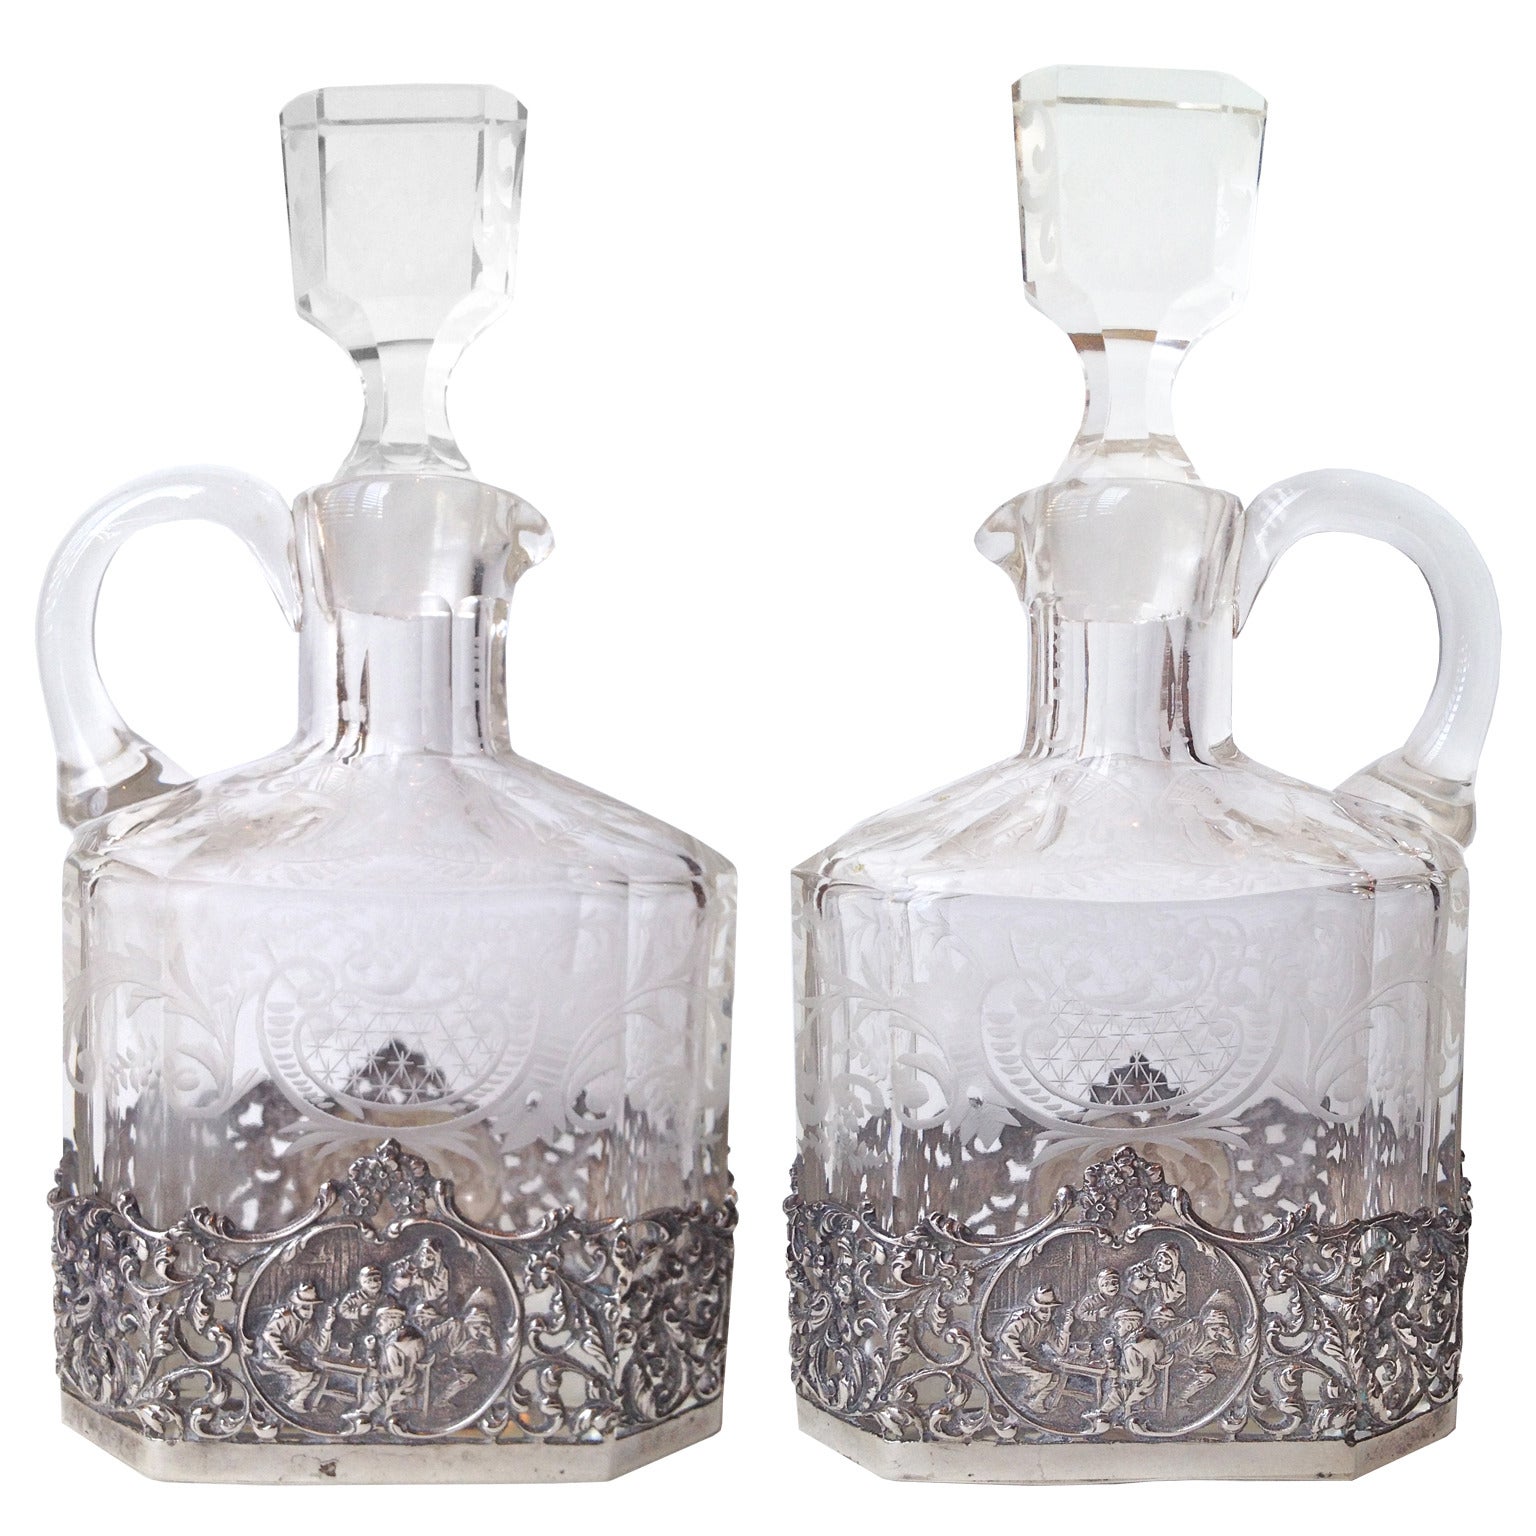 Fine Pair of German 800. Silver Mounted Etched Glass Decanters circa 1900